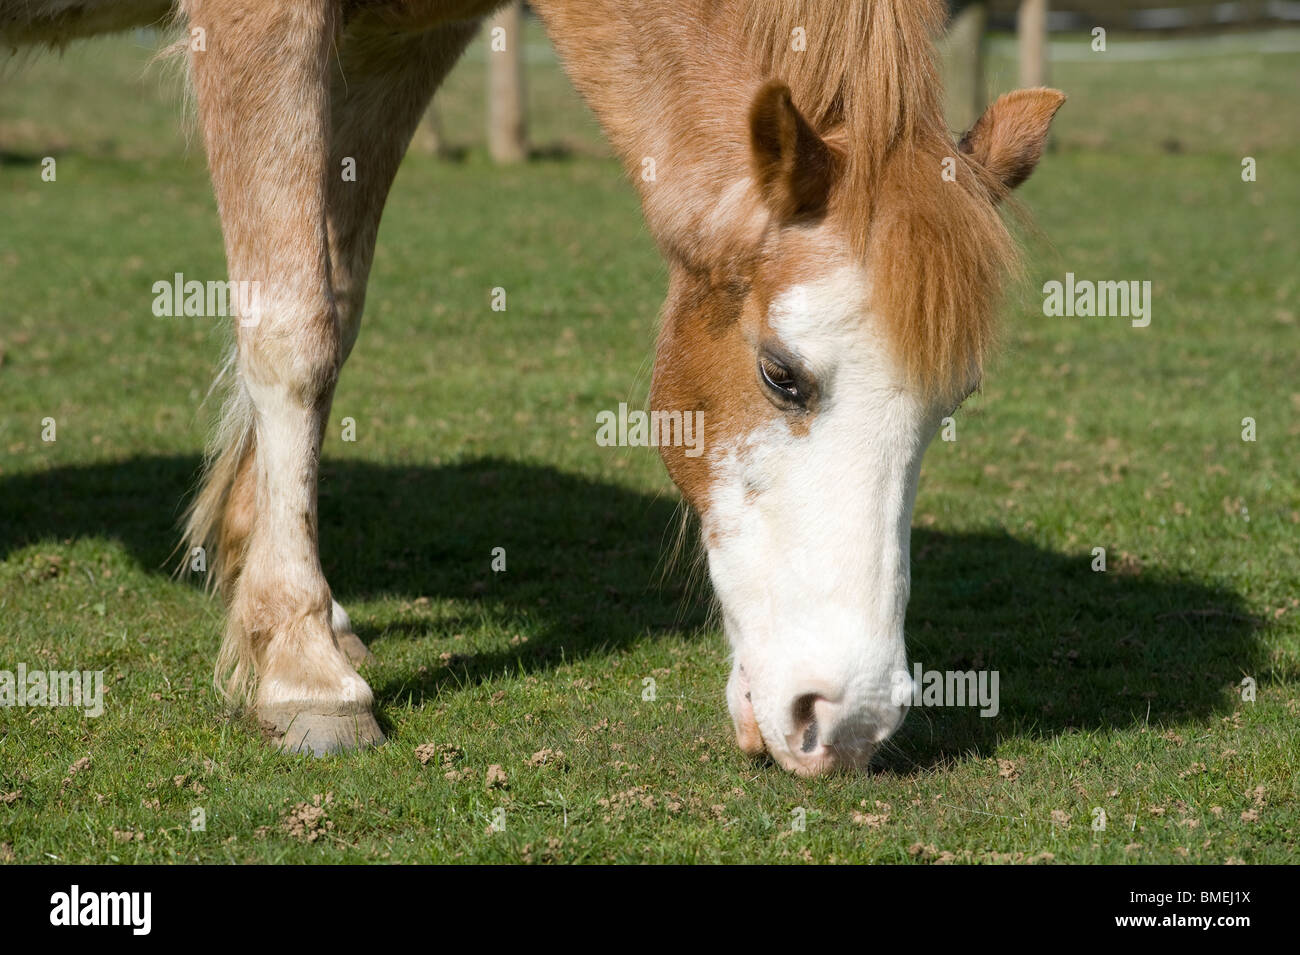 Strawberry roan new forest horse at an animal rescue centre. Stock Photo